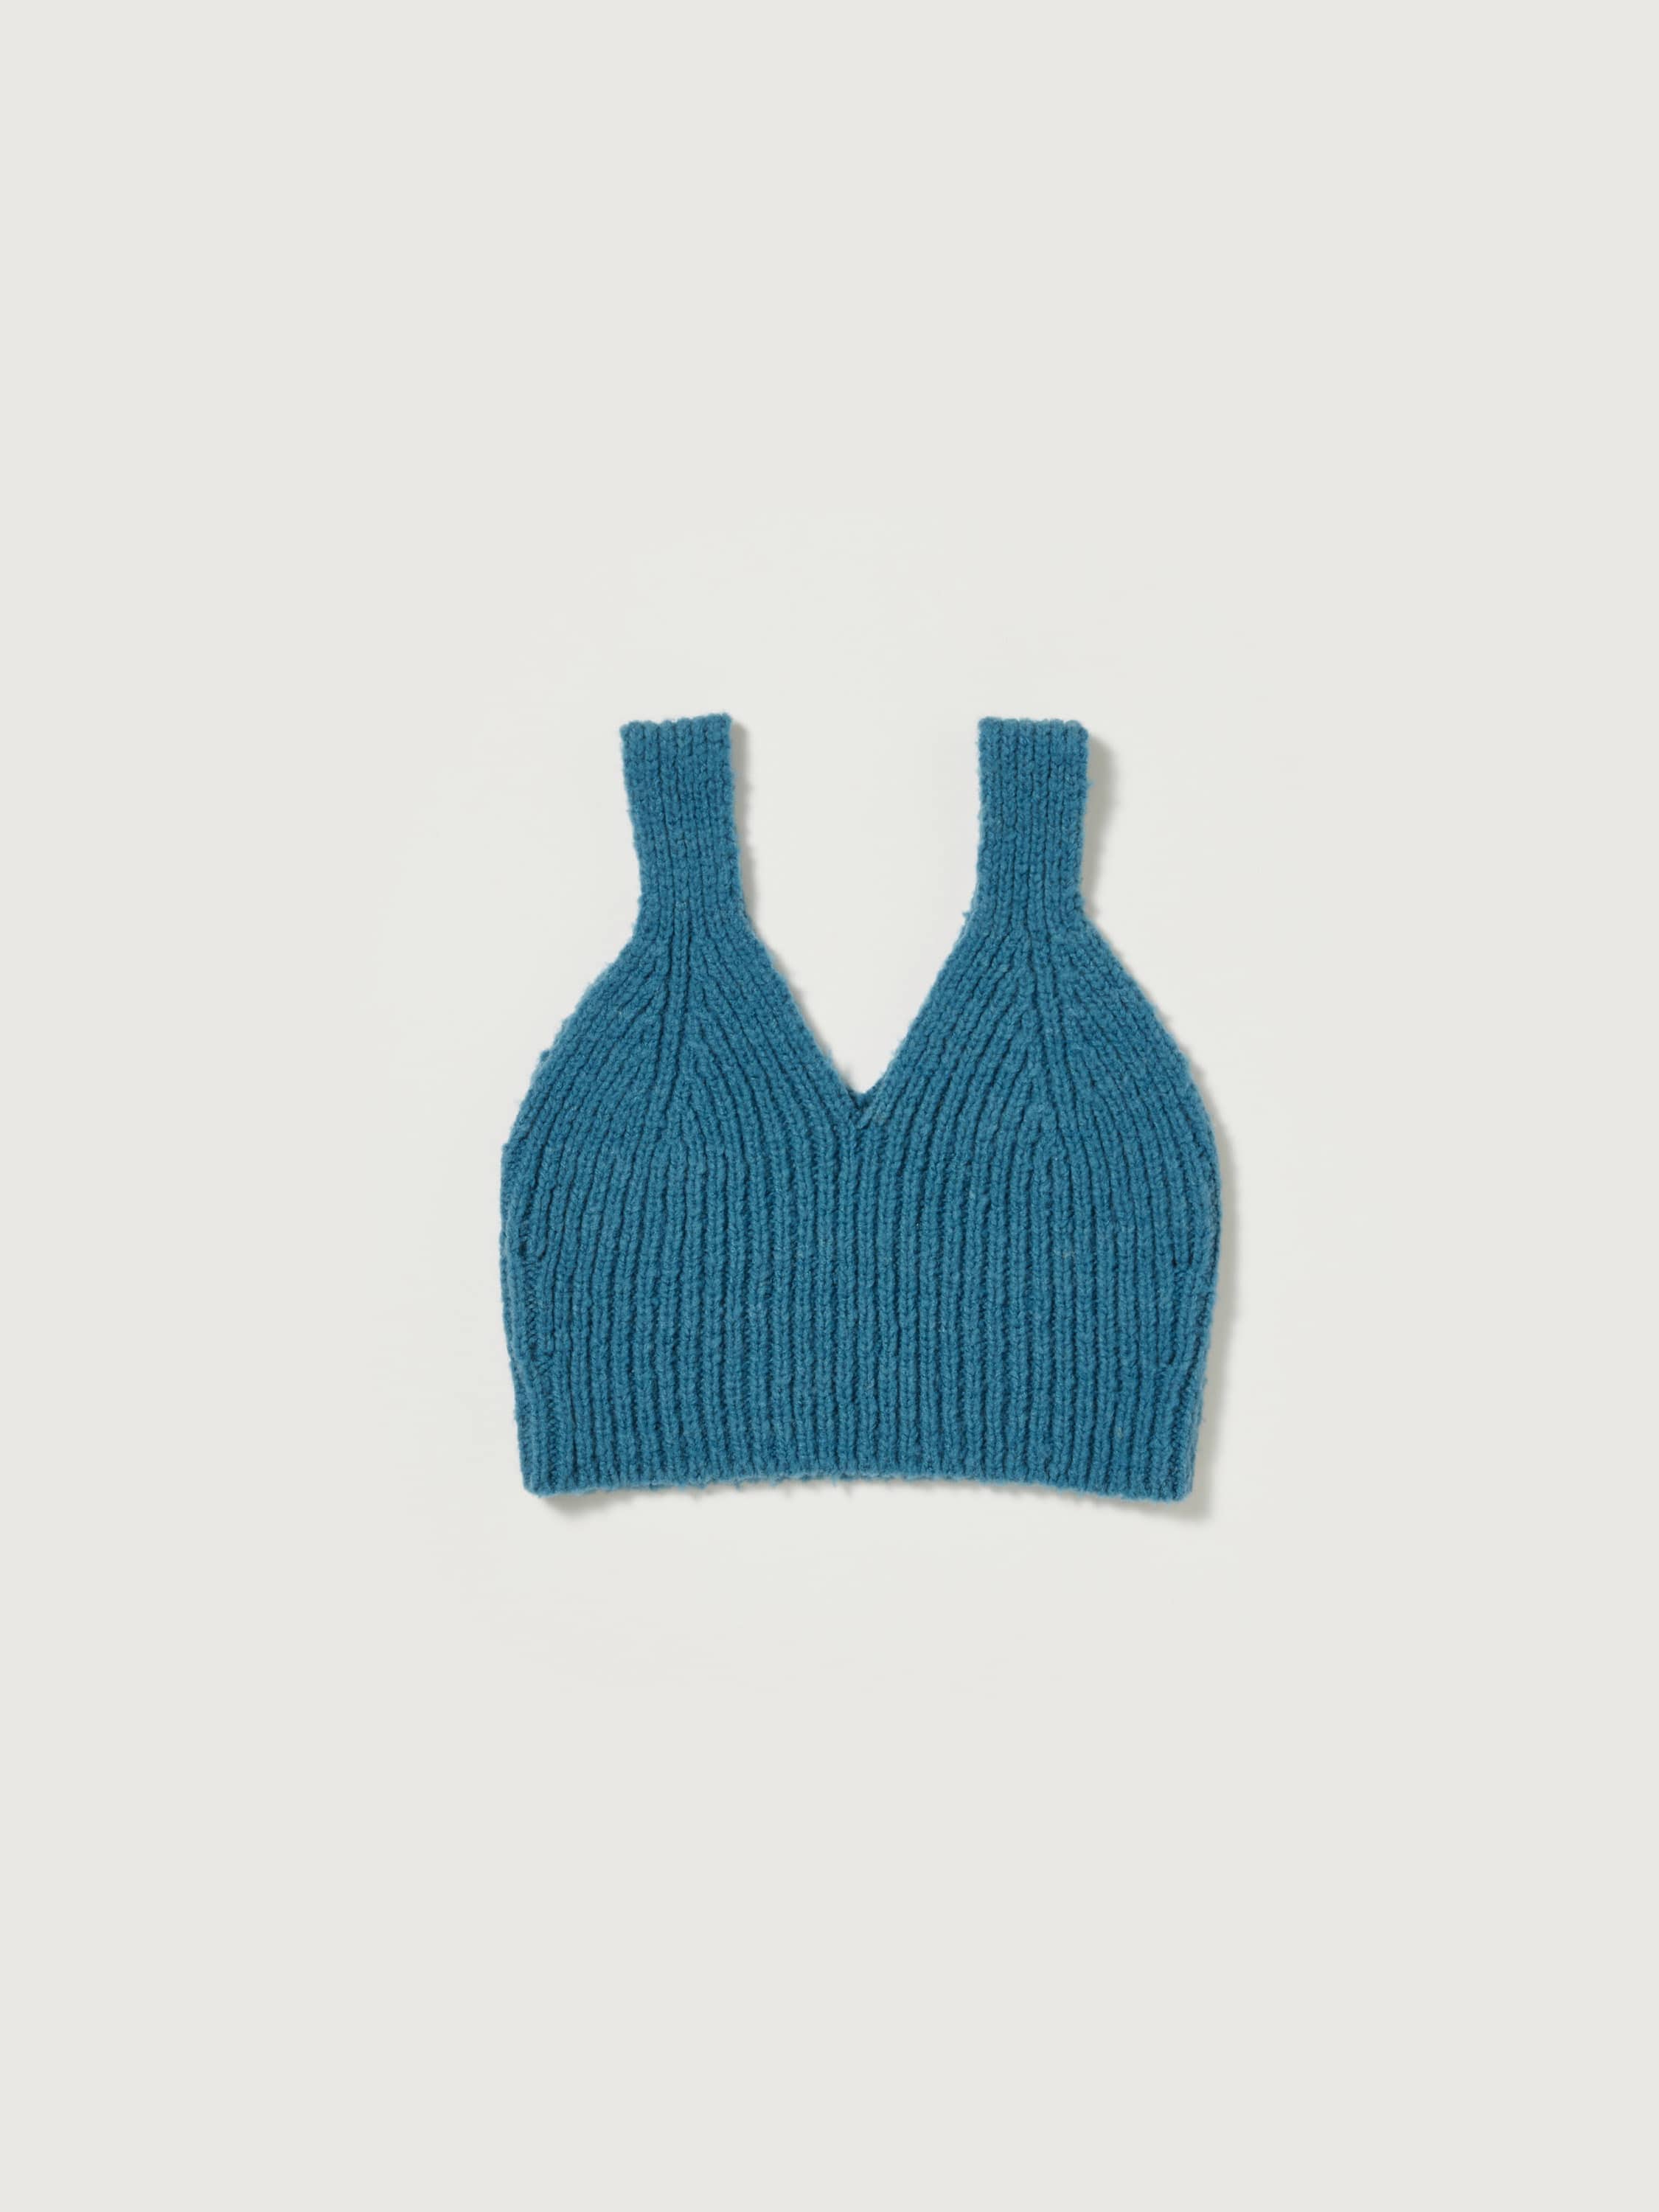 WOOL BABY CAMEL BRUSHED YARN KNIT CAMISOLE 詳細画像 BLUE 1